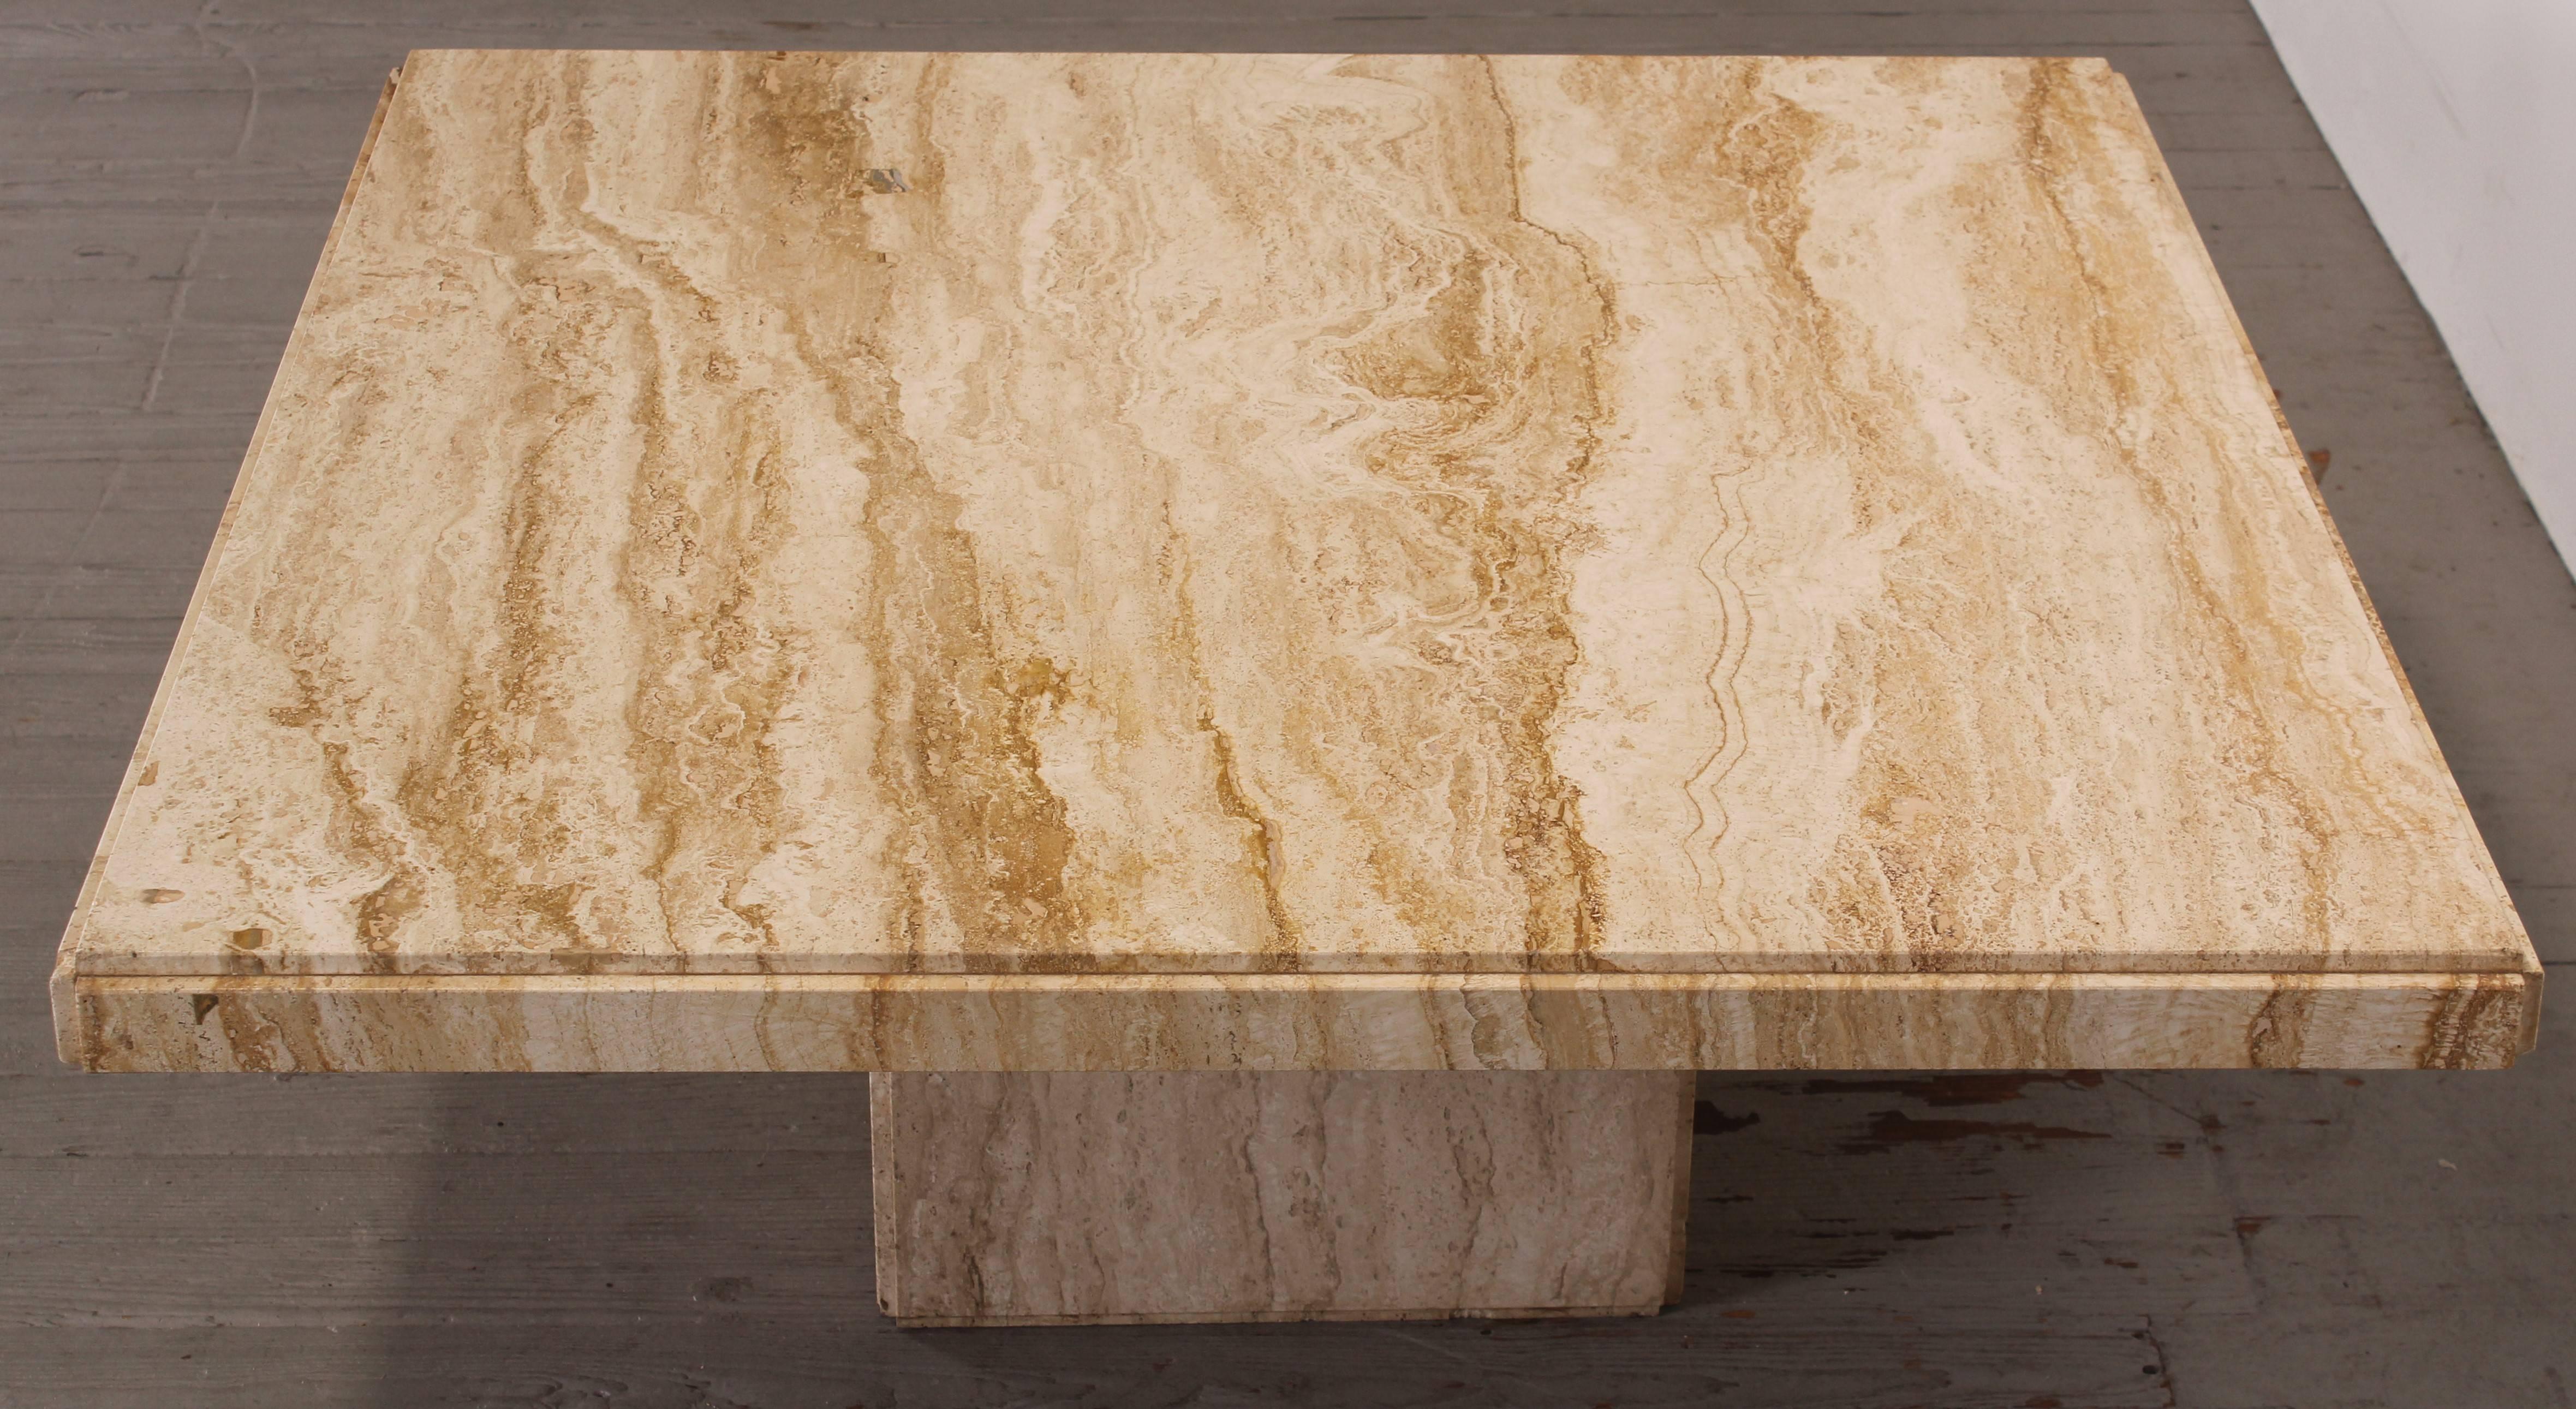 A modern functional two-piece variegated travertine square marble coffee  table. This is a very sturdy natural stone table that will look great in any modern or  traditional home.
